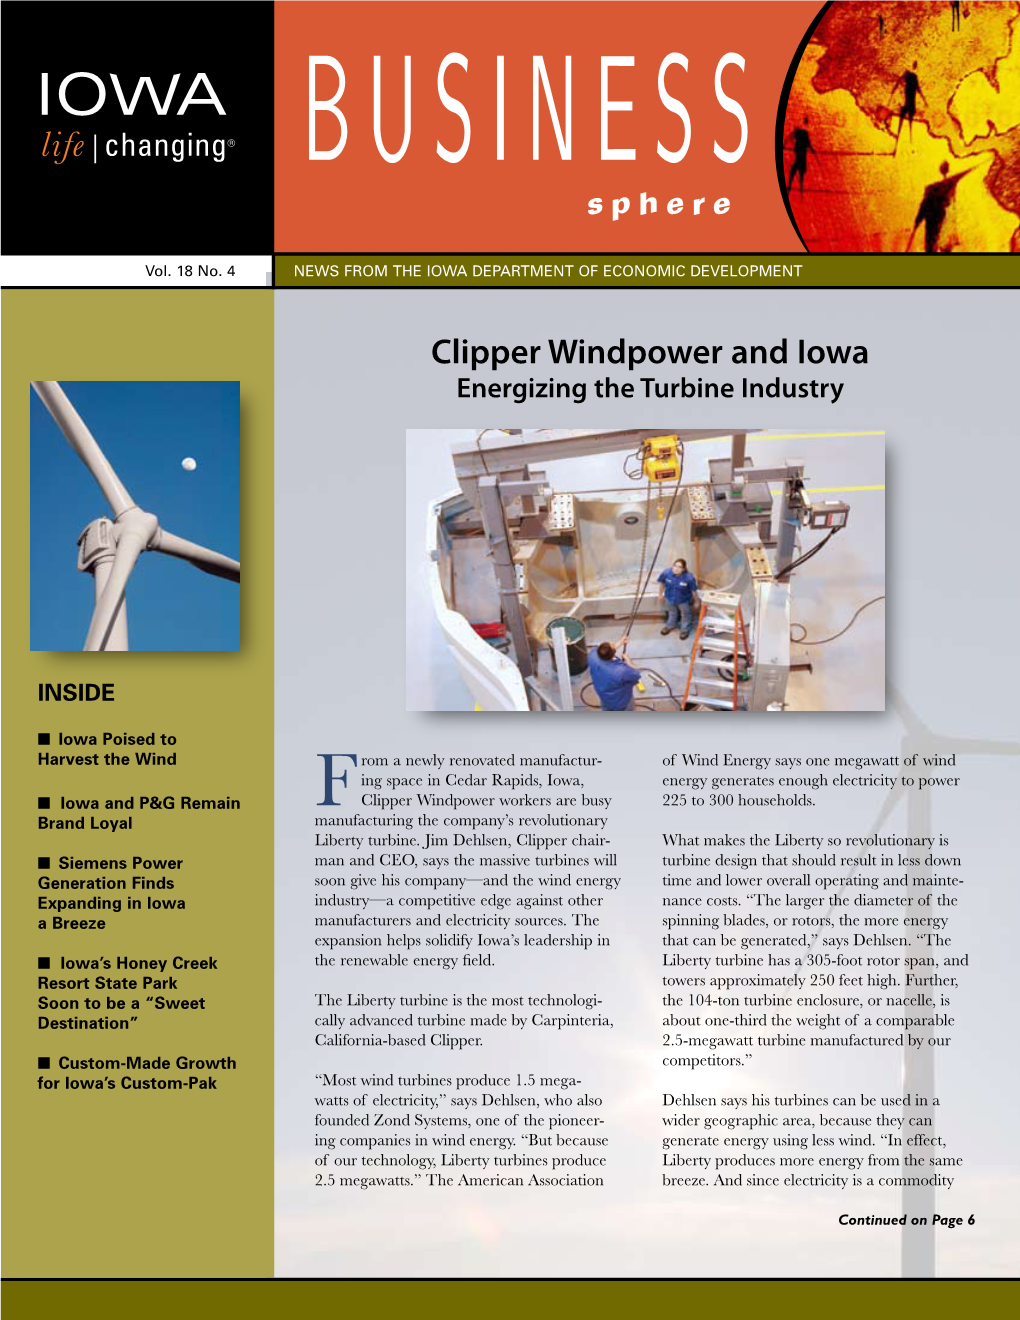 Clipper Windpower and Iowa Energizing the Turbine Industry